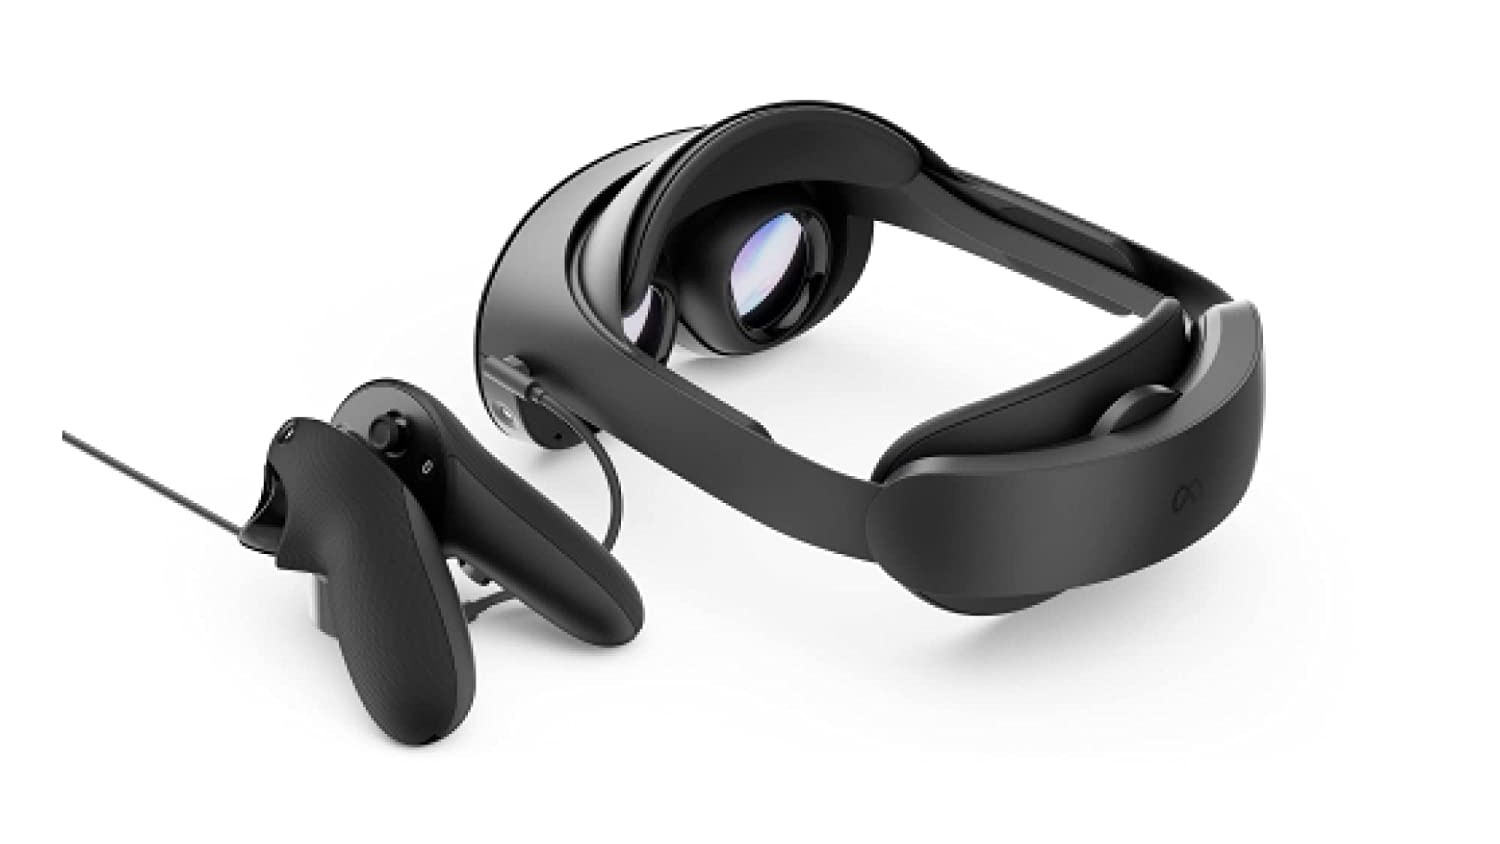 Meta Quest 3, next-gen Mixed Reality headset launched, ahead of expected  debut of the Apple Reality Pro headset at WWDC